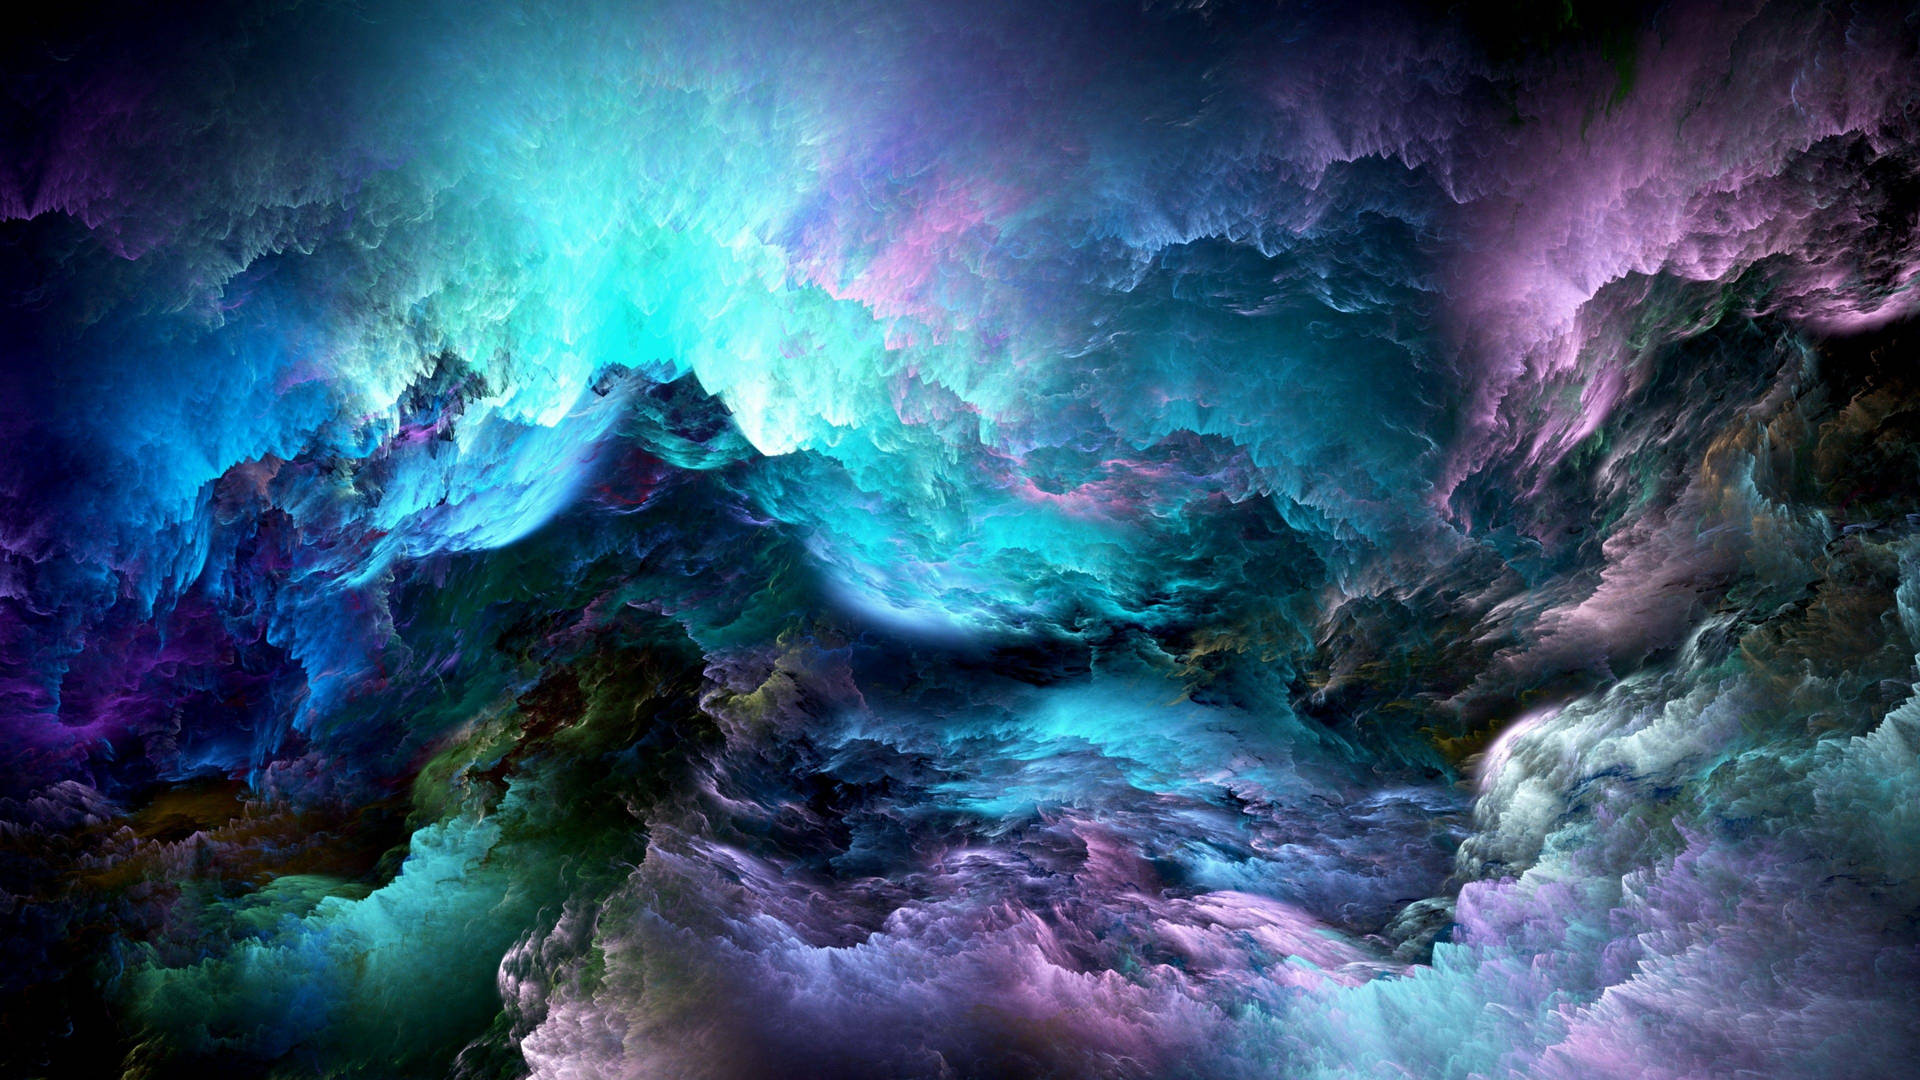 "Seeing the beauty in the multicolored clouds" Wallpaper